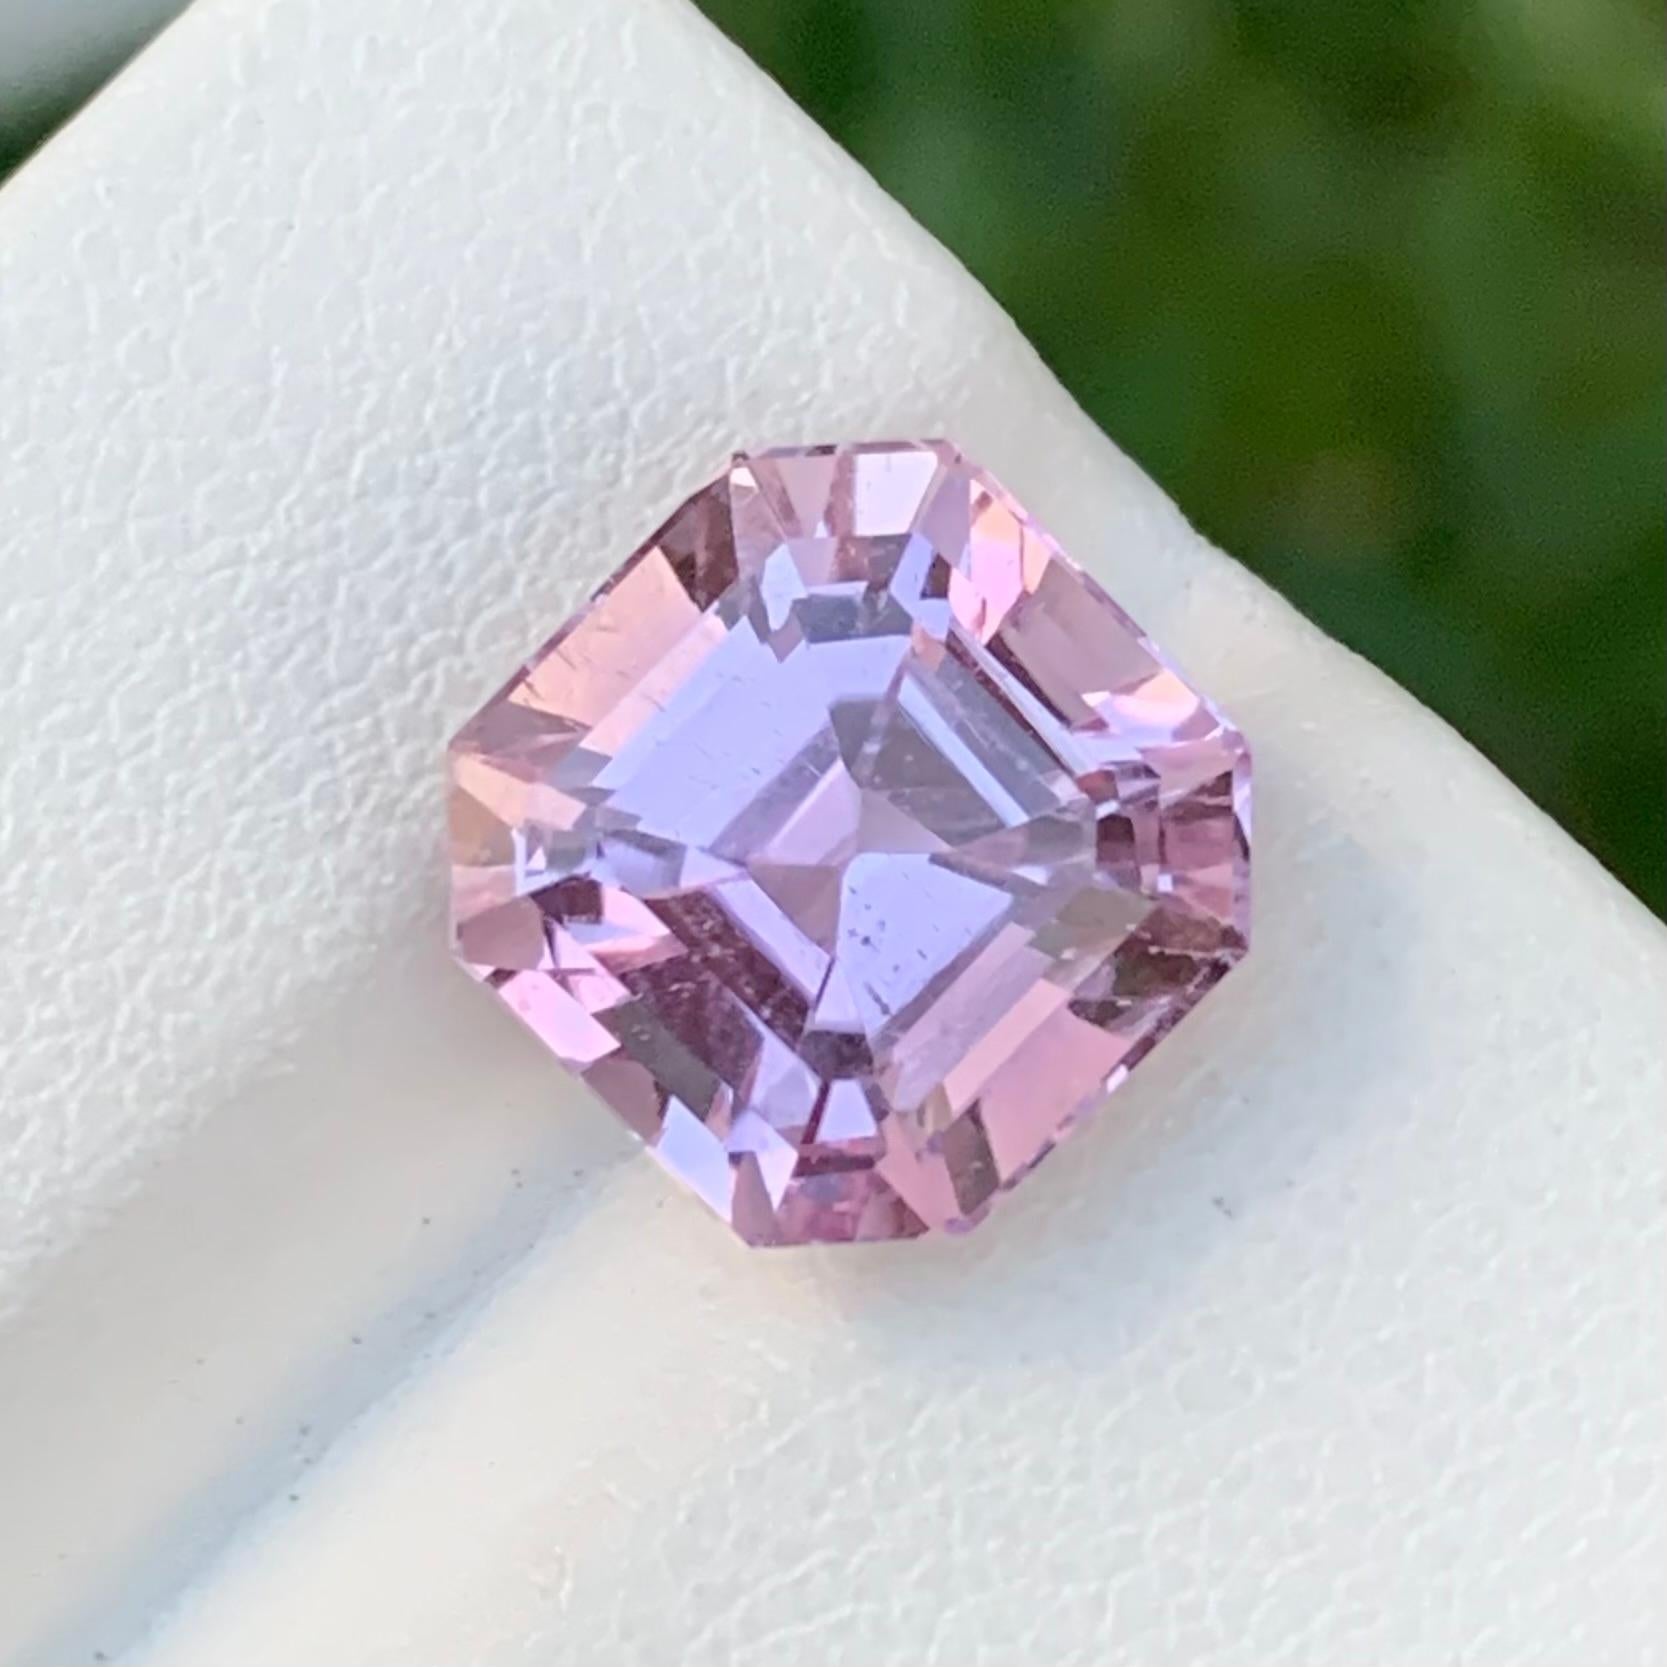 Loose Kunzite
Weight: 6.50 Carats
Dimension: 10.4 x 10.4 x 7.9 Mm
Colour: Pale Pink
Origin: Kunar, Afghanistan
Treatment: Non
Certficate: On Demand

Kunzite, a delicate and enchanting gemstone, is cherished for its exquisite pink to lilac hues.